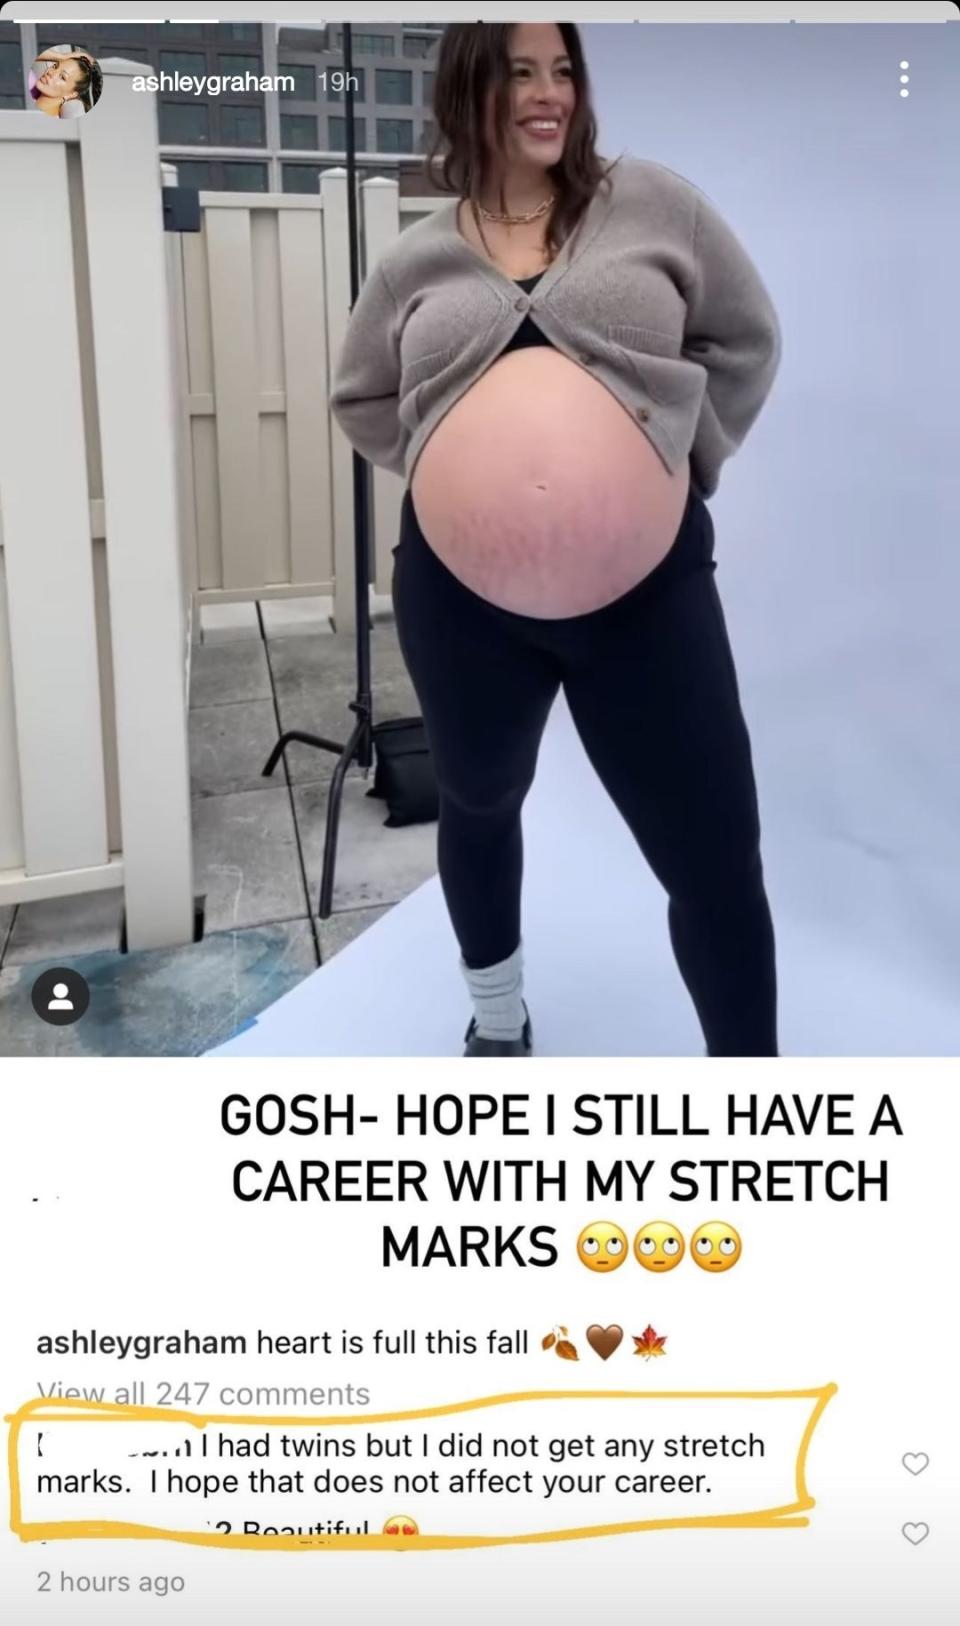 Ashley, who confirmed she was pregnant with twins back in September, posted a screenshot of the comment in her Instagram story, writing: “Gosh still hope I have a career with my stretch marks ������”This comes just a month after she told Access Hollywood: 